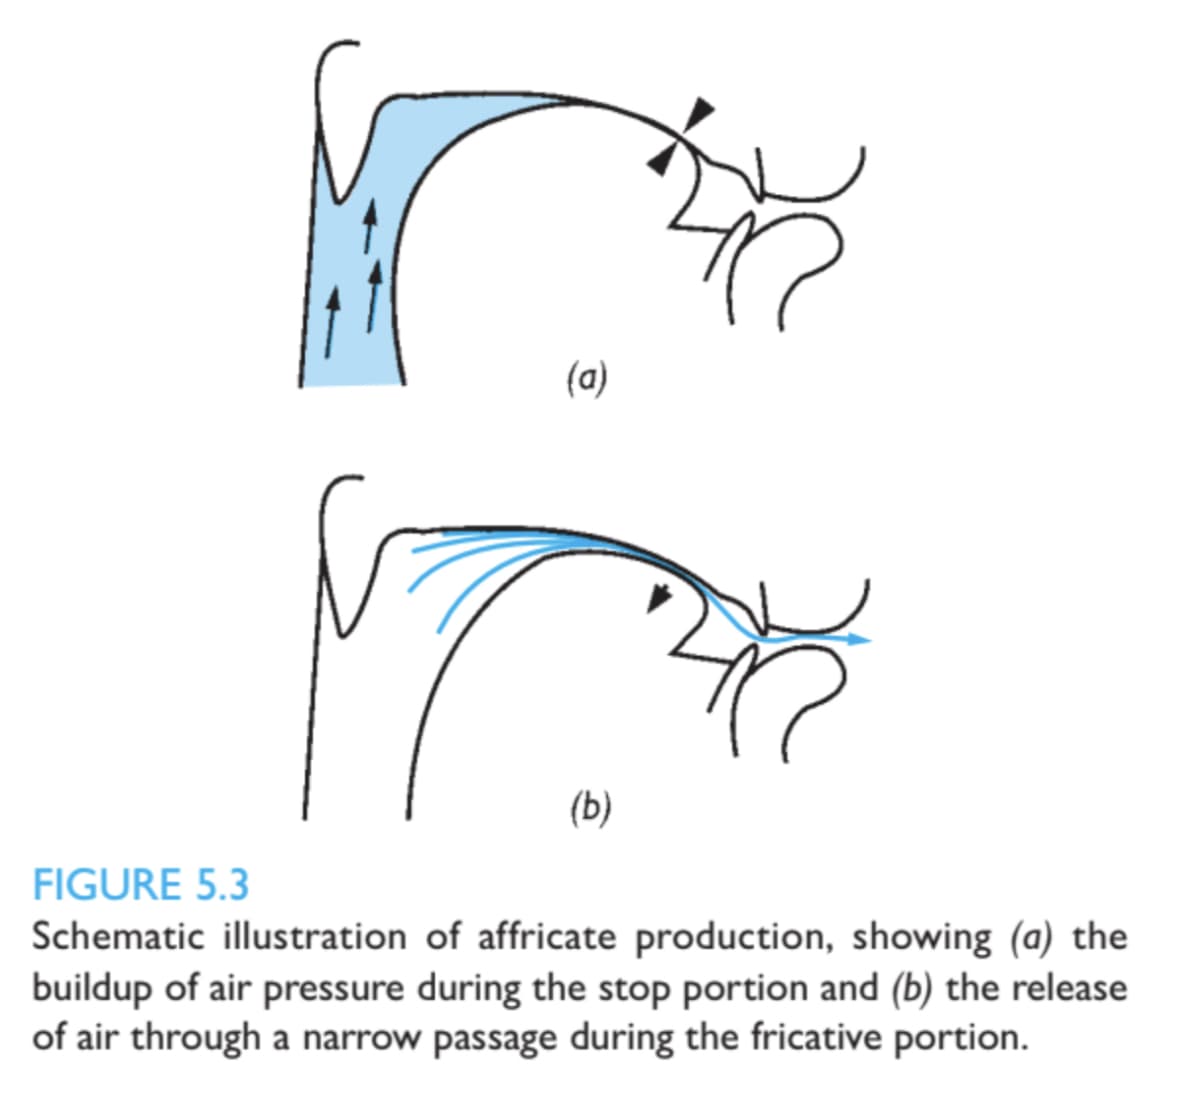 (a)
(b)
FIGURE 5.3
Schematic illustration of affricate production, showing (a) the
buildup of air pressure during the stop portion and (b) the release
of air through a narrow passage during the fricative portion.
